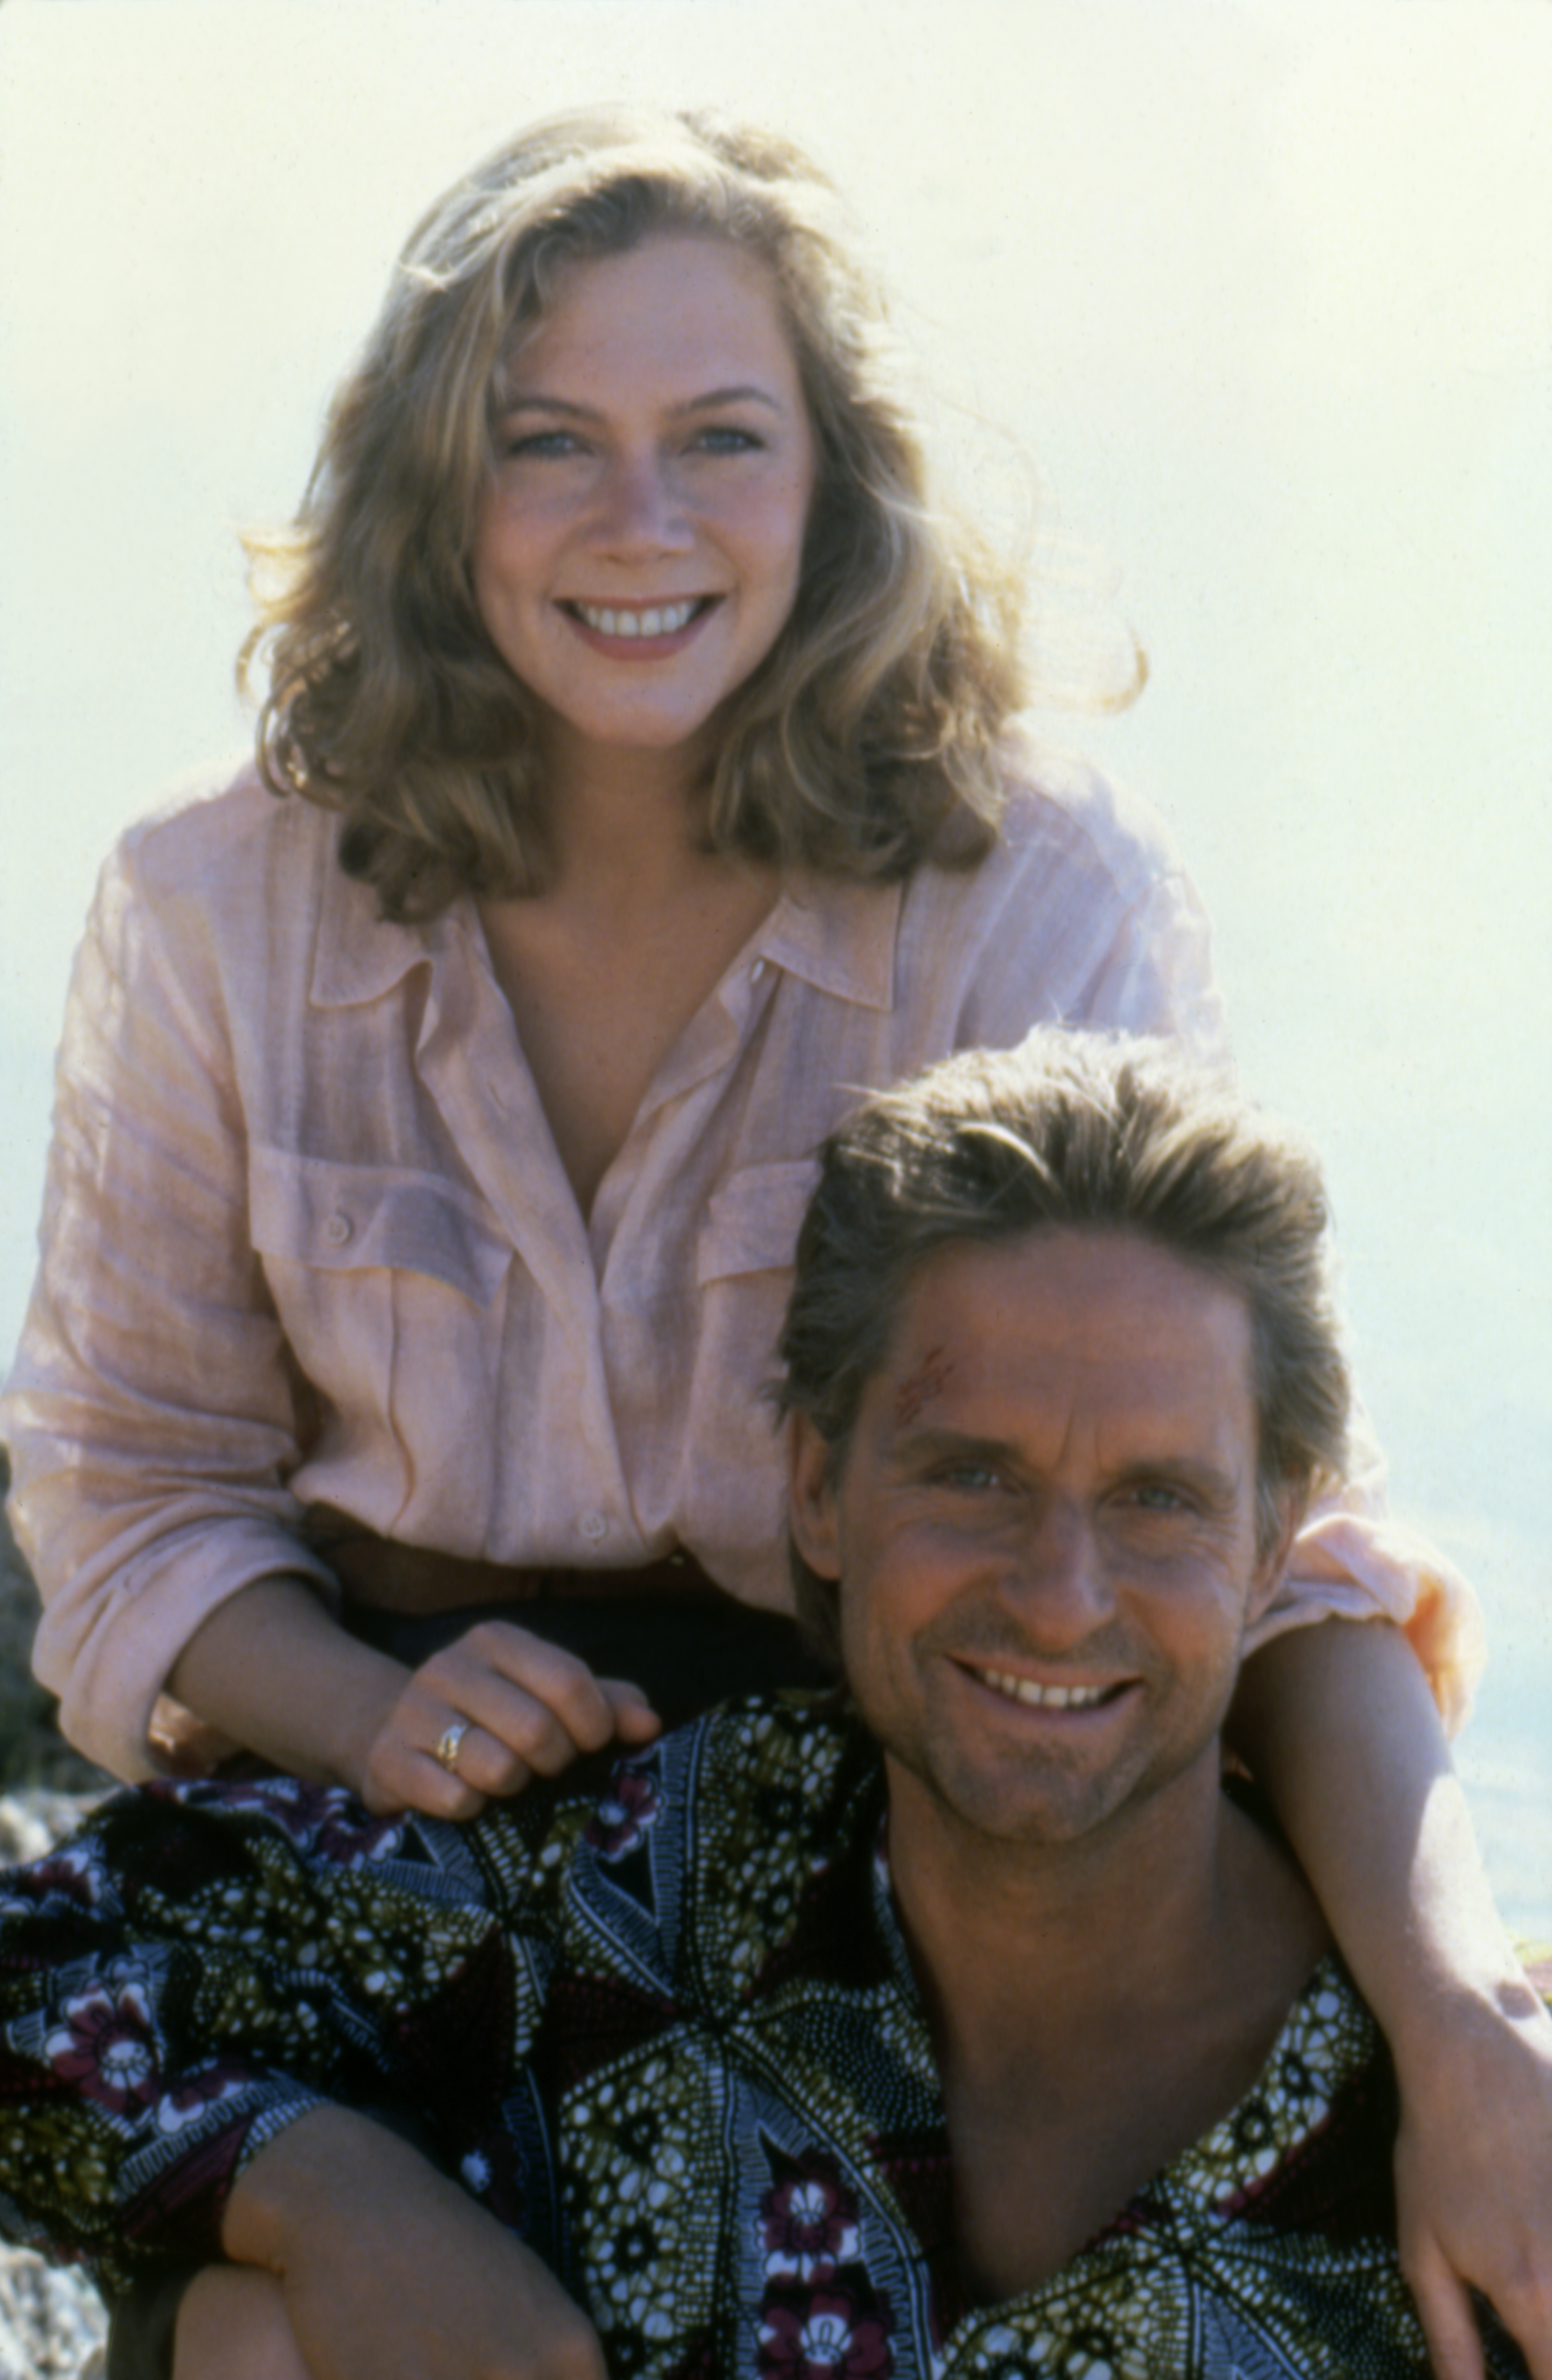 Kathleen Turner and Michael Douglas posing on the set of "The Jewel of the Nile" in 1985 | Source: Getty Images